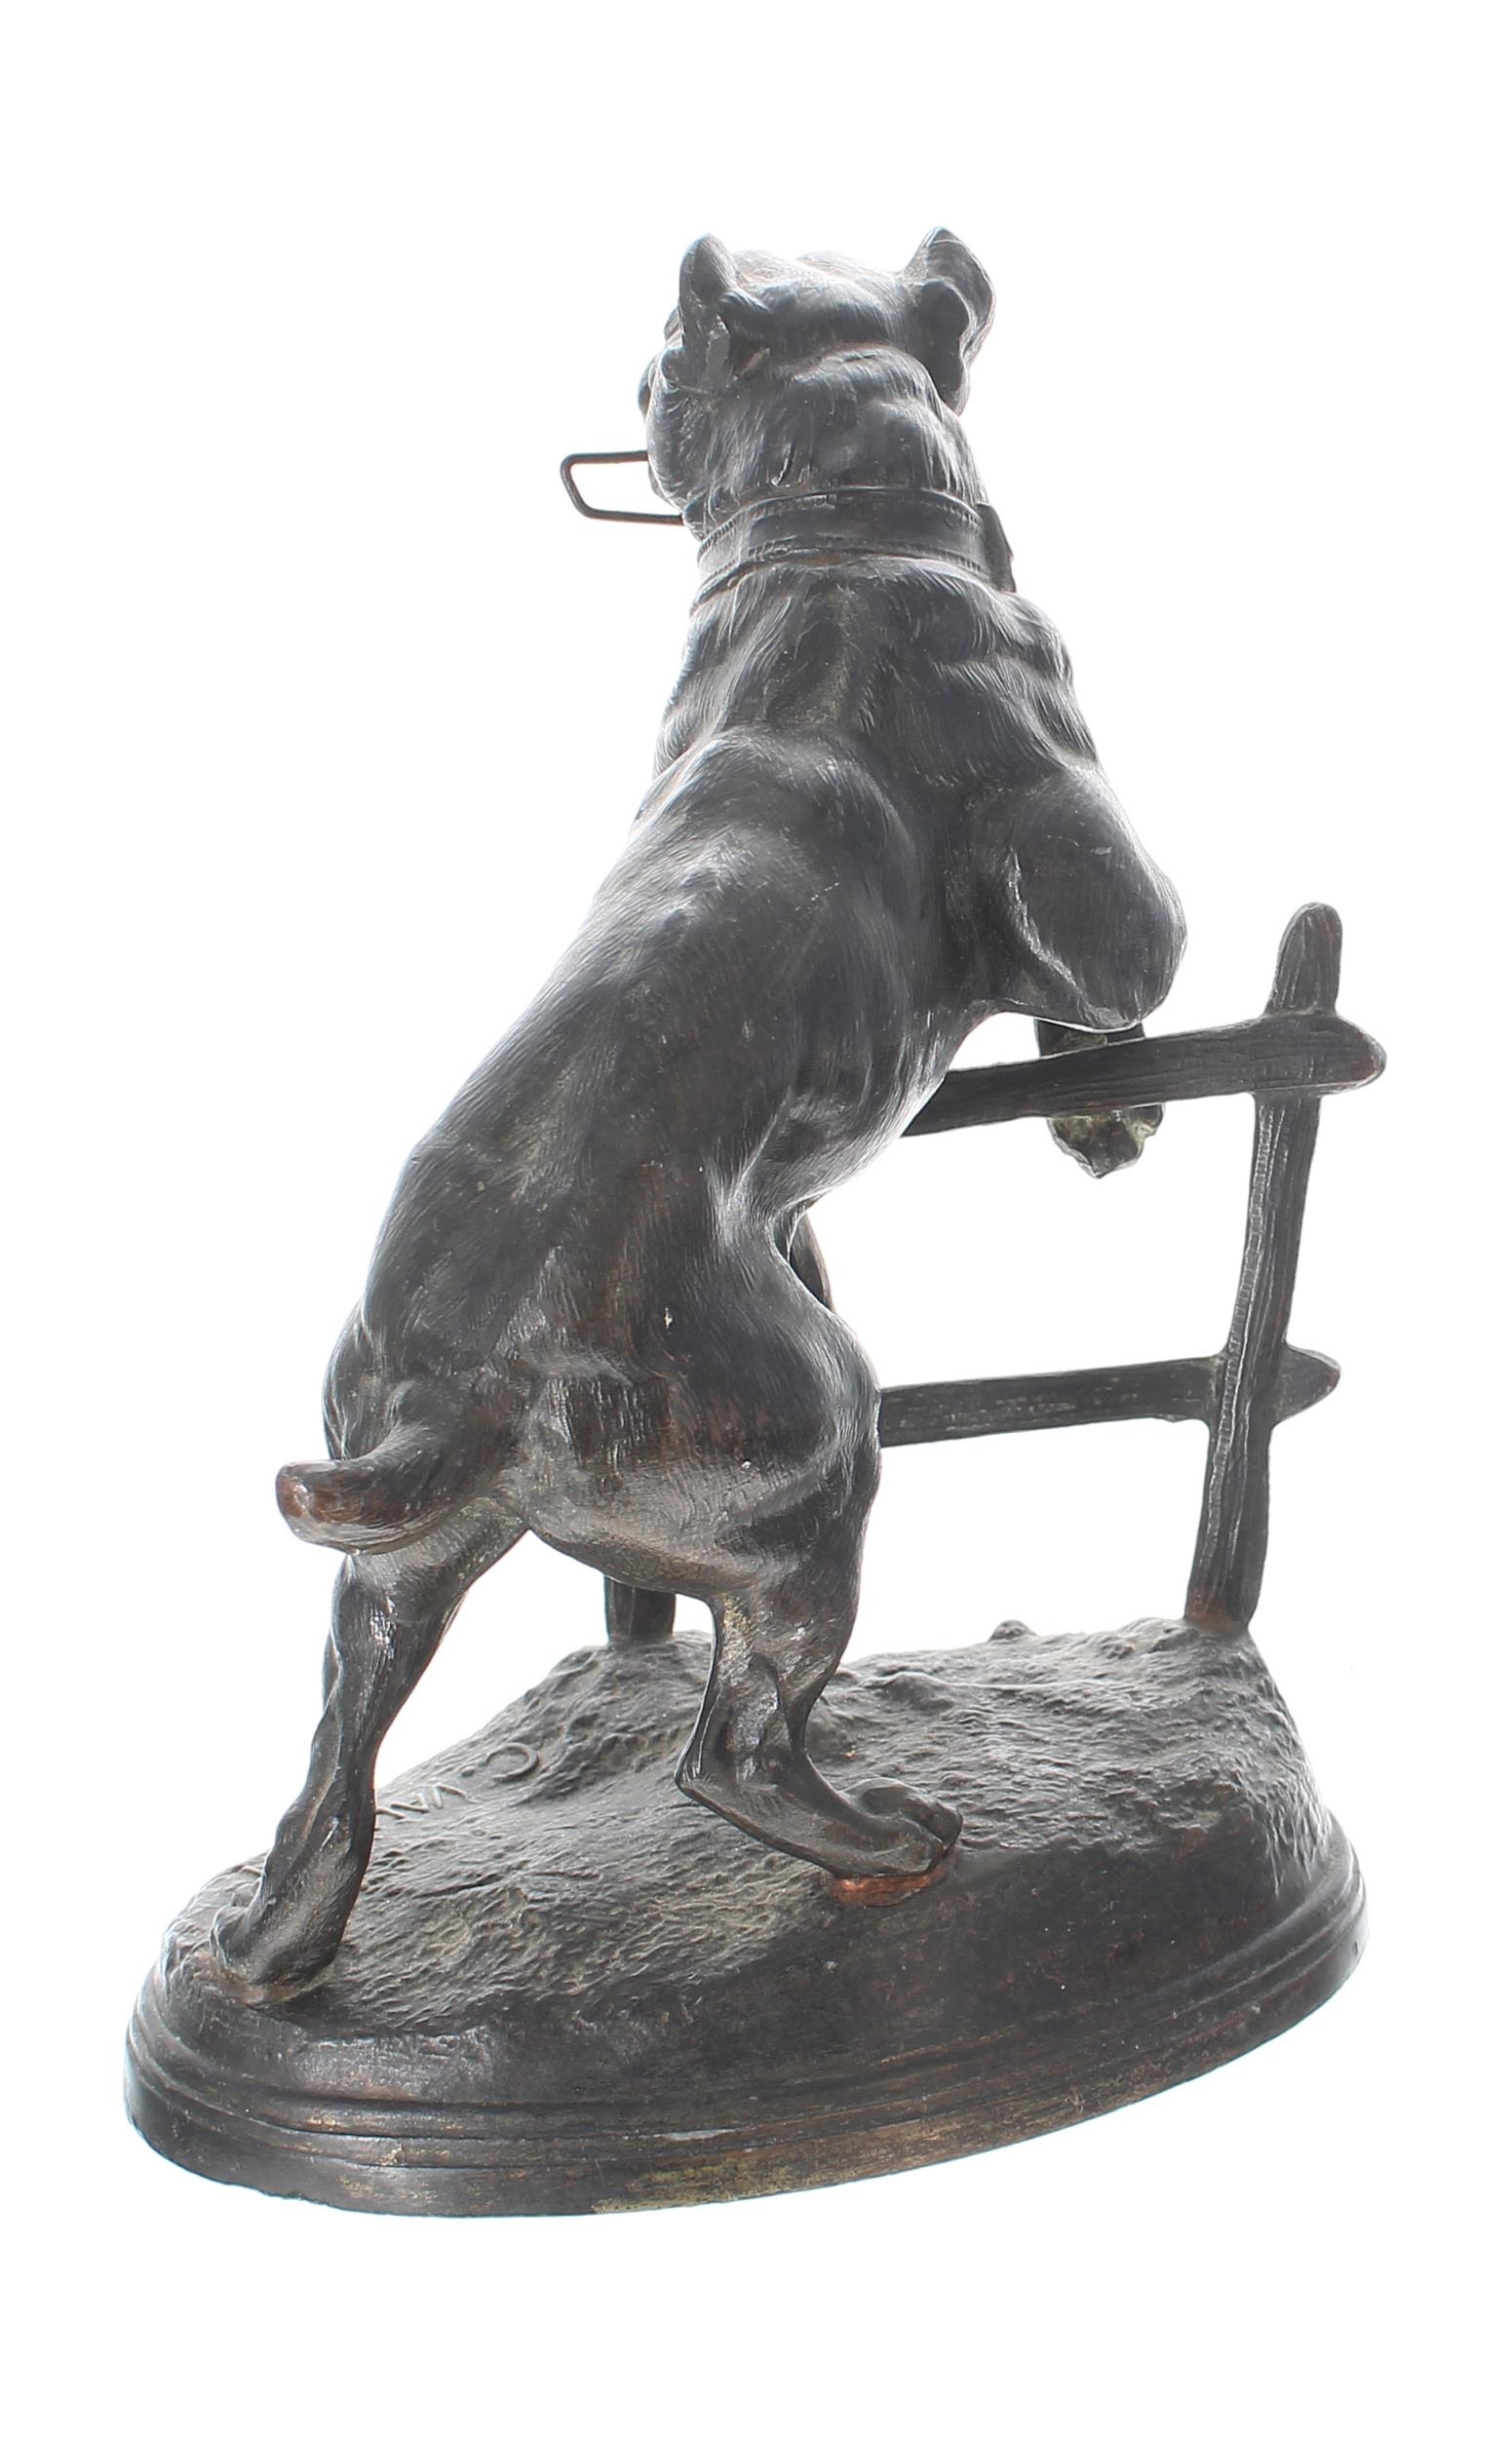 Spelter novelty pocket watch stand in the form of a guard dog upon hind legs climbing a fence, - Image 2 of 3